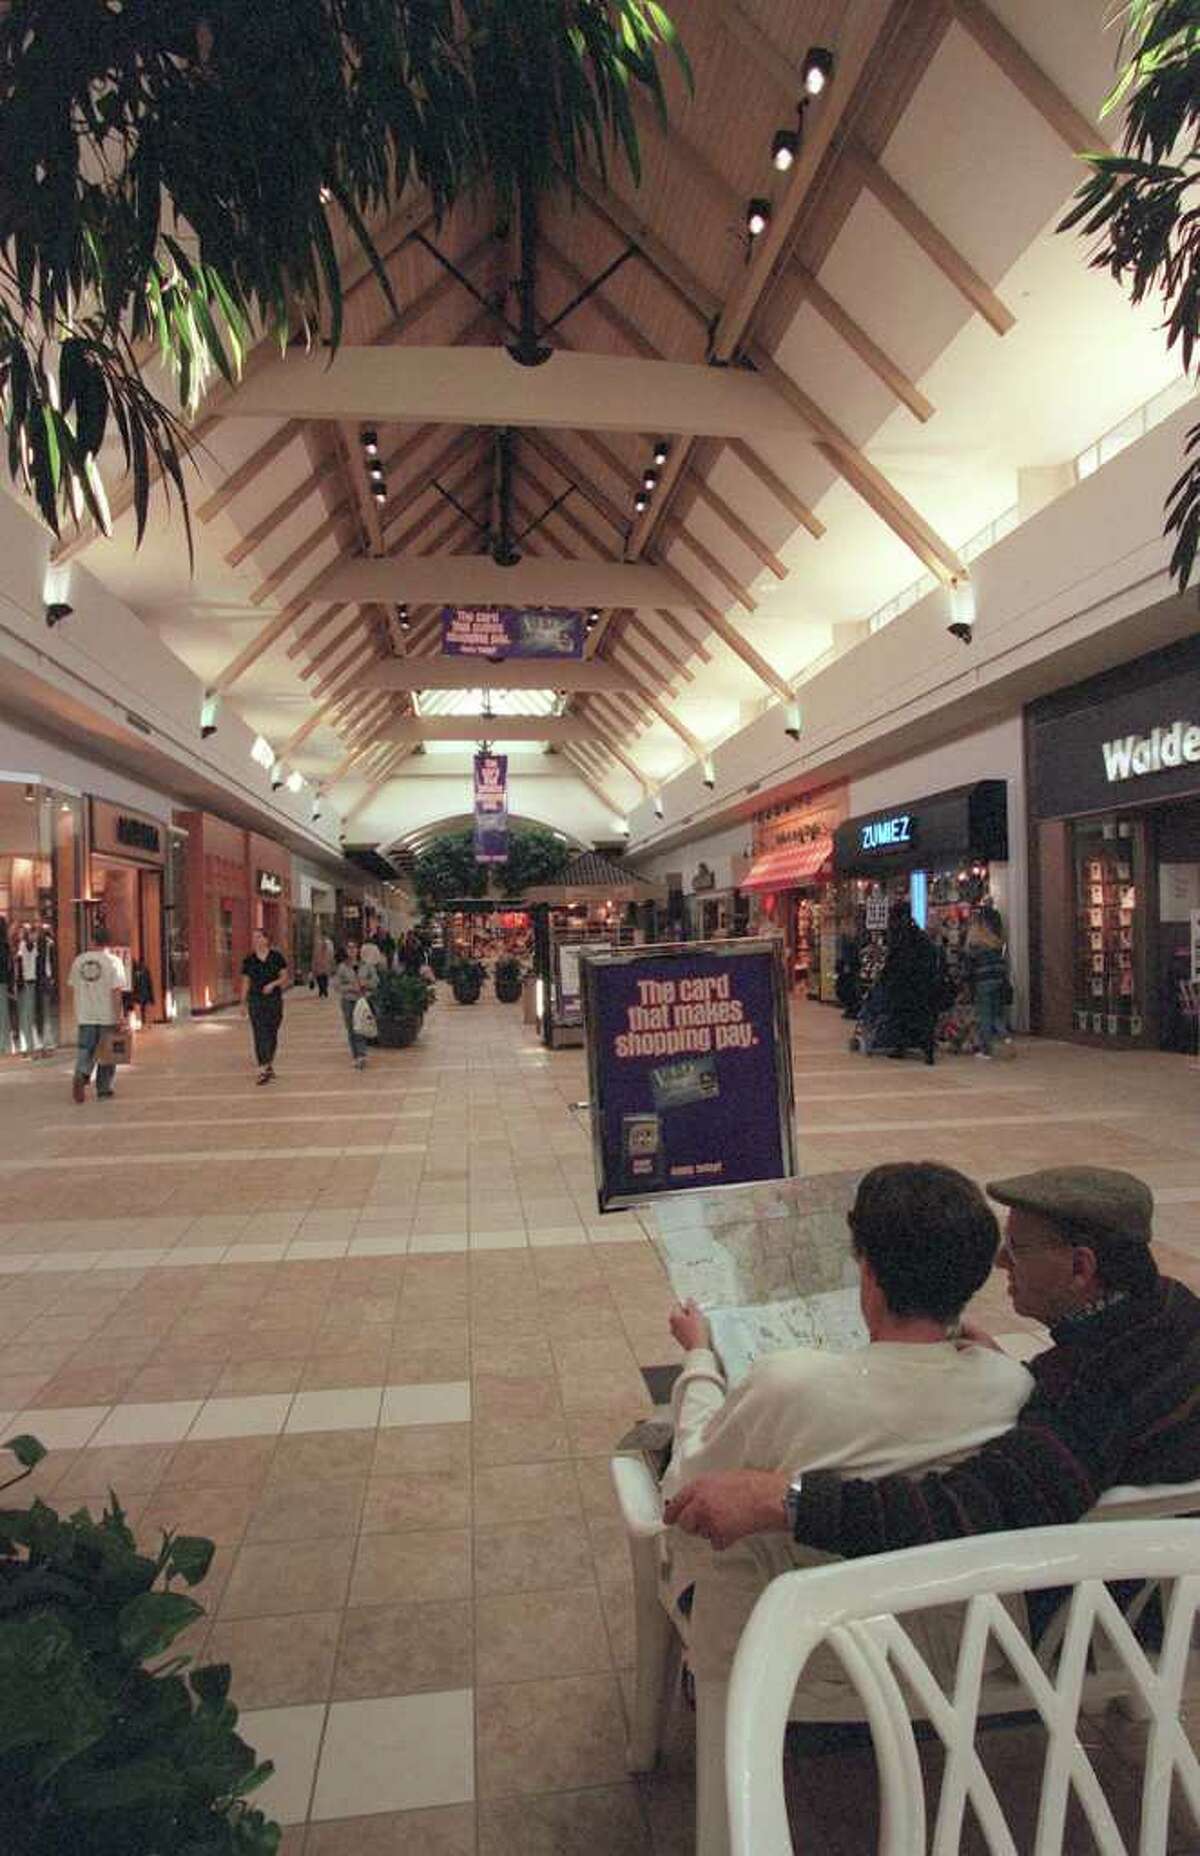 Seattle History Looking Back At Northgate Mall The Nations First